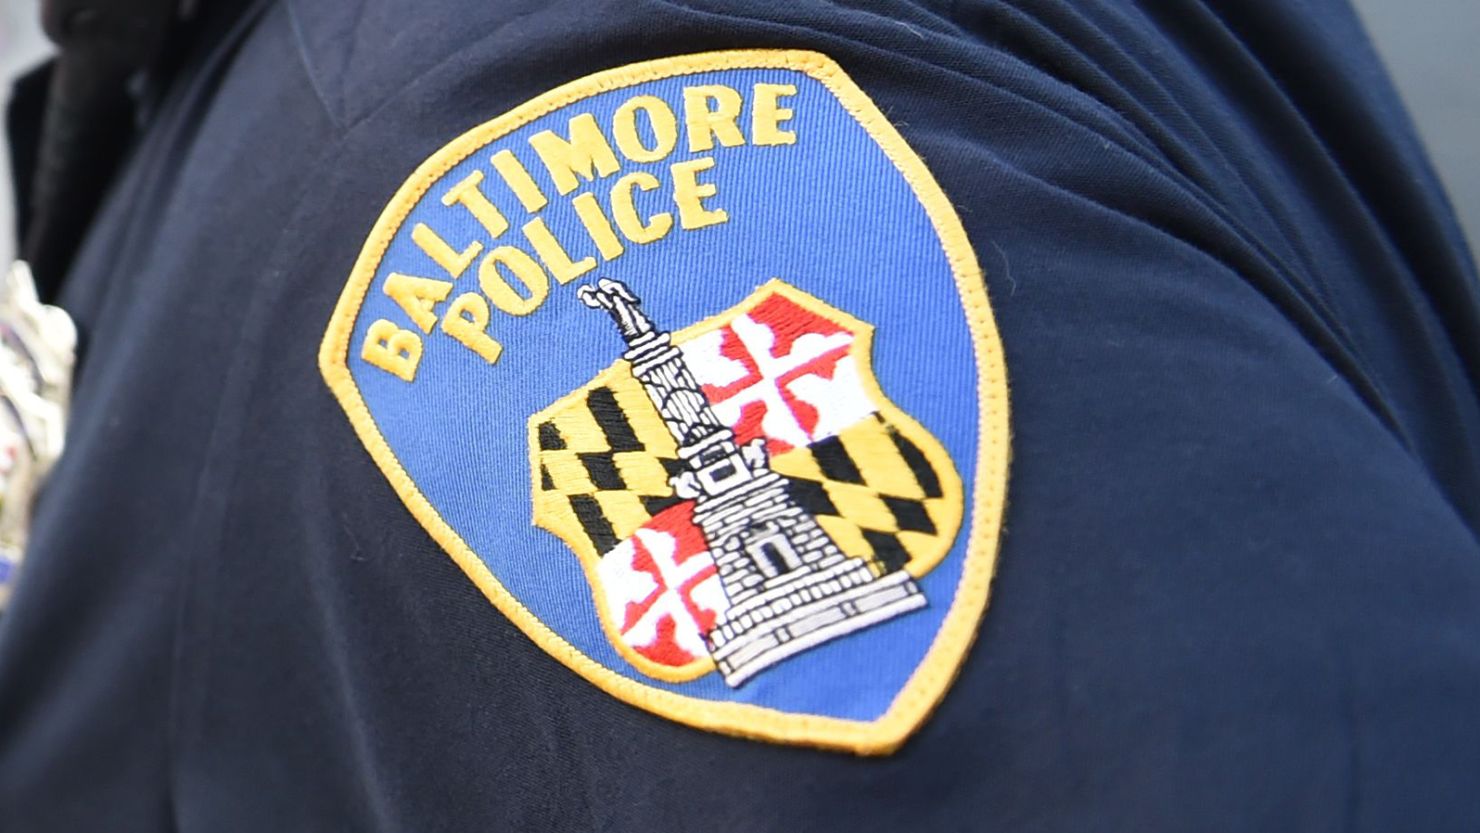 Two Baltimore police officers were indicted in a case involving the alleged assault of a teen during an arrest last year, according to prosecutors.